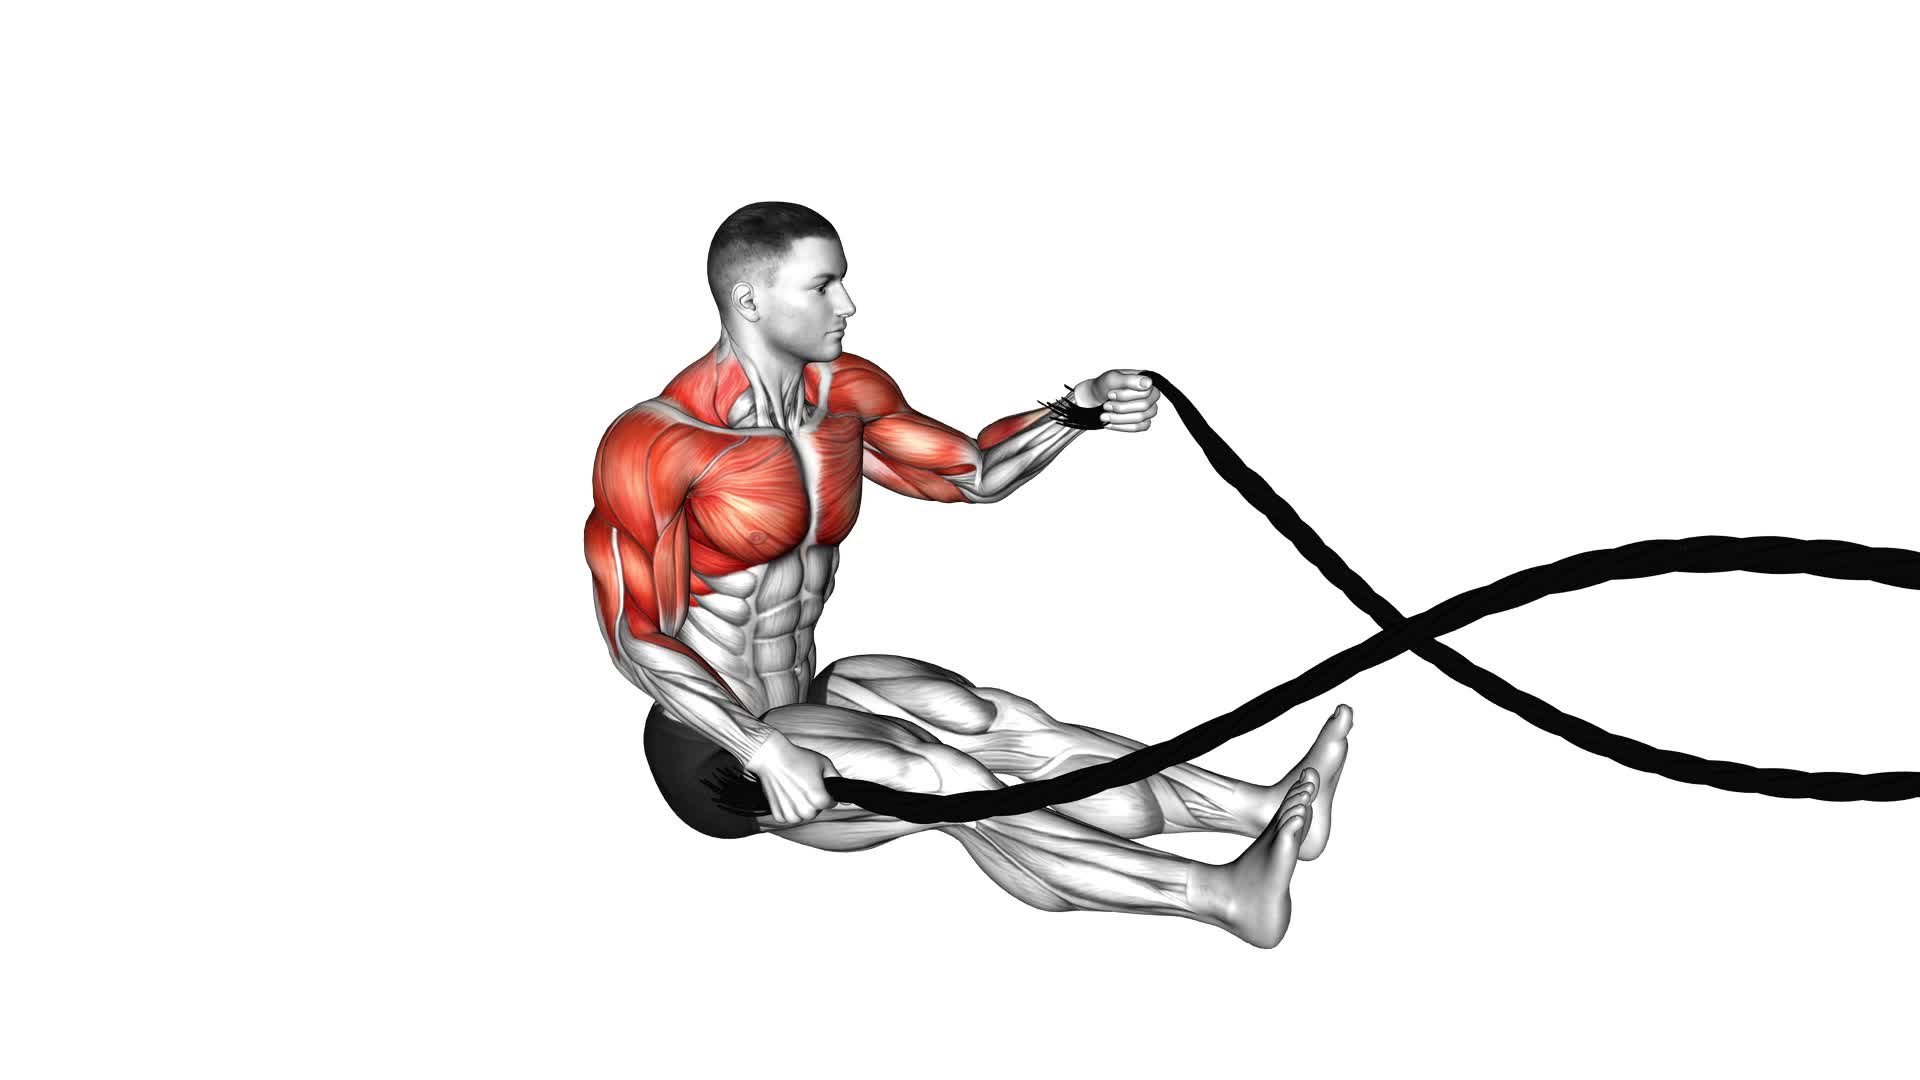 Battling Ropes Seated (male) - Video Exercise Guide & Tips